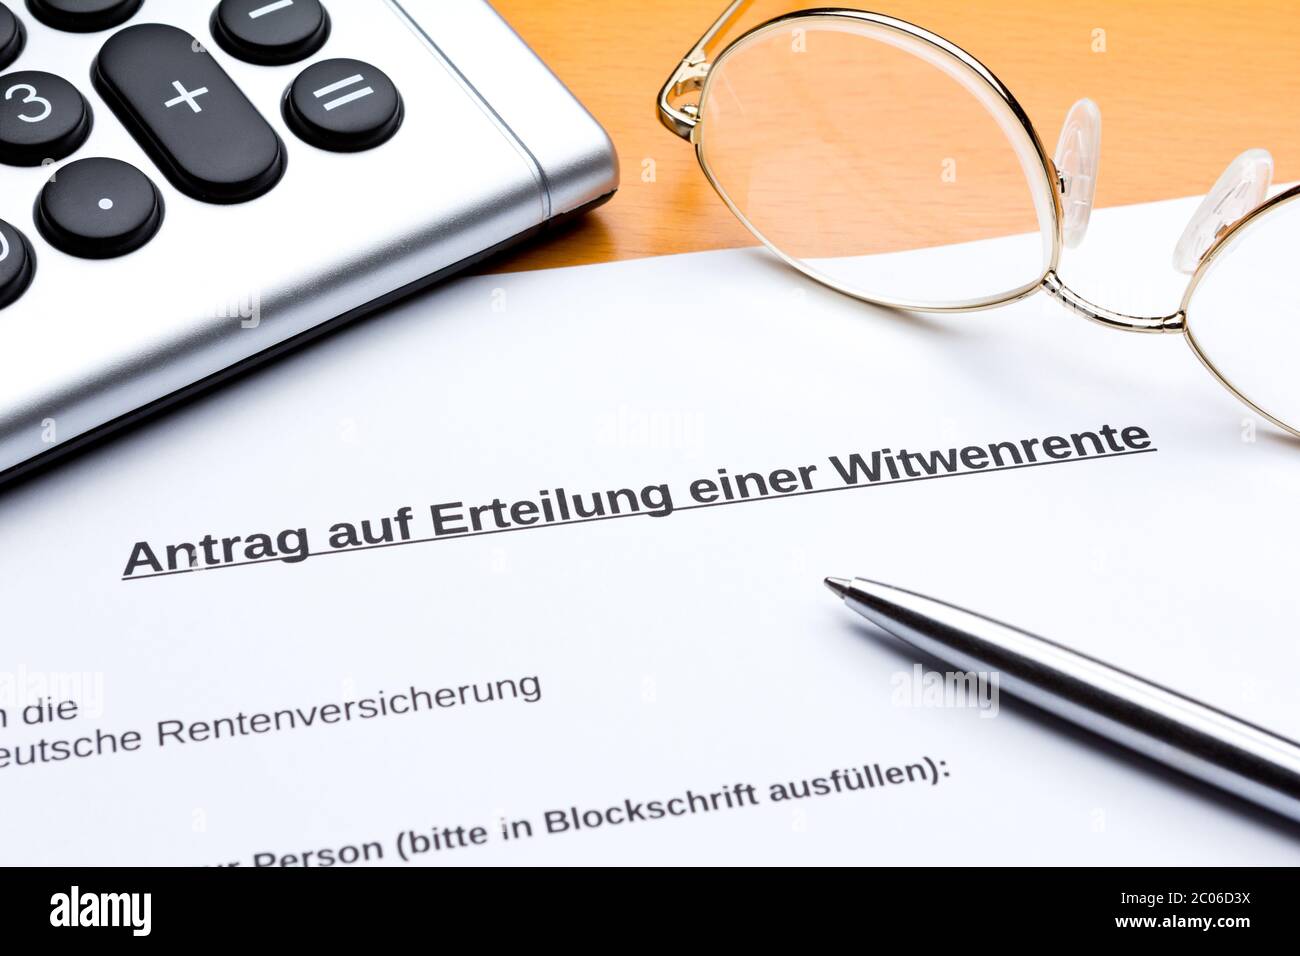 Request for state pension after death of husband in germany: antrag witwenrente. Stock Photo